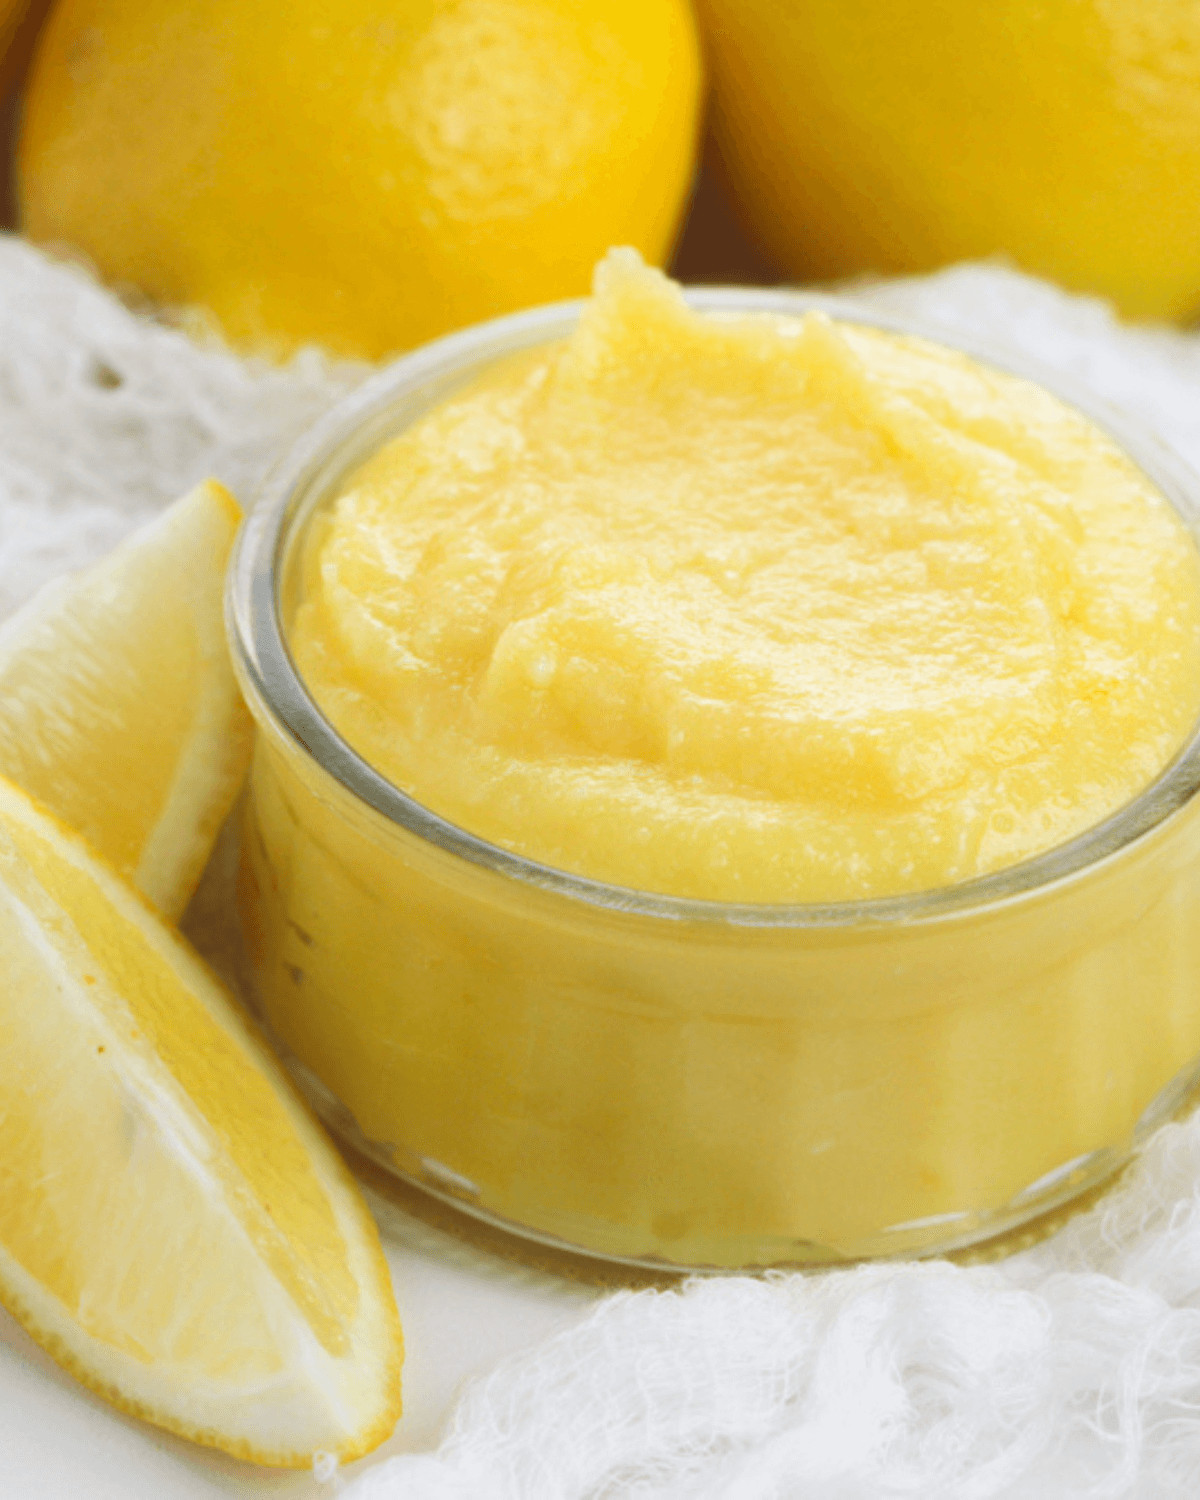 A glass dish of the lemon curd with lemons on the side.